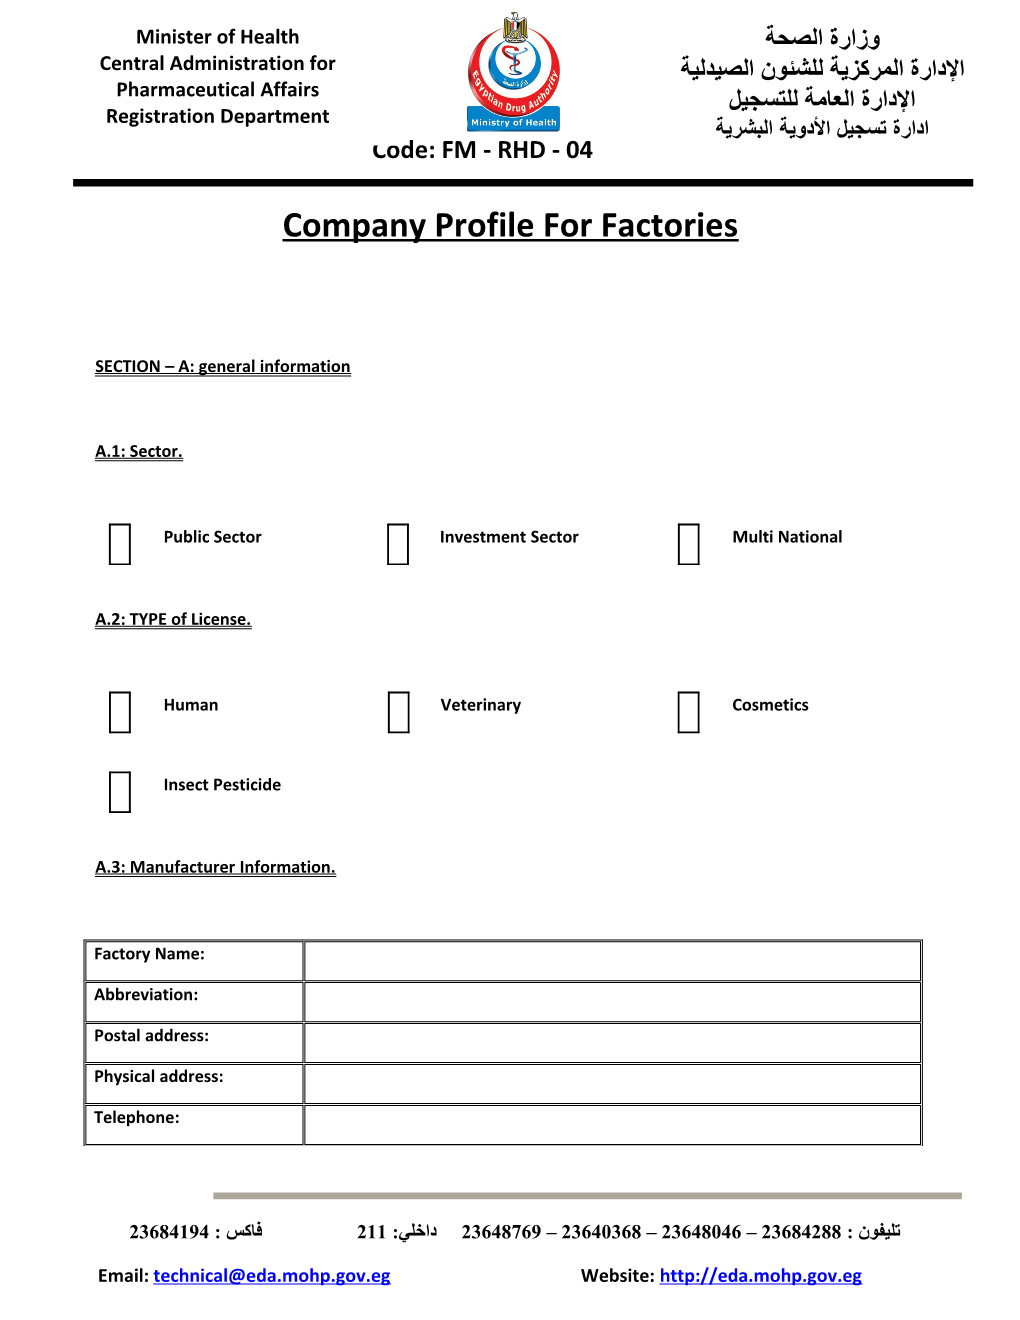 Company Profile for Factories